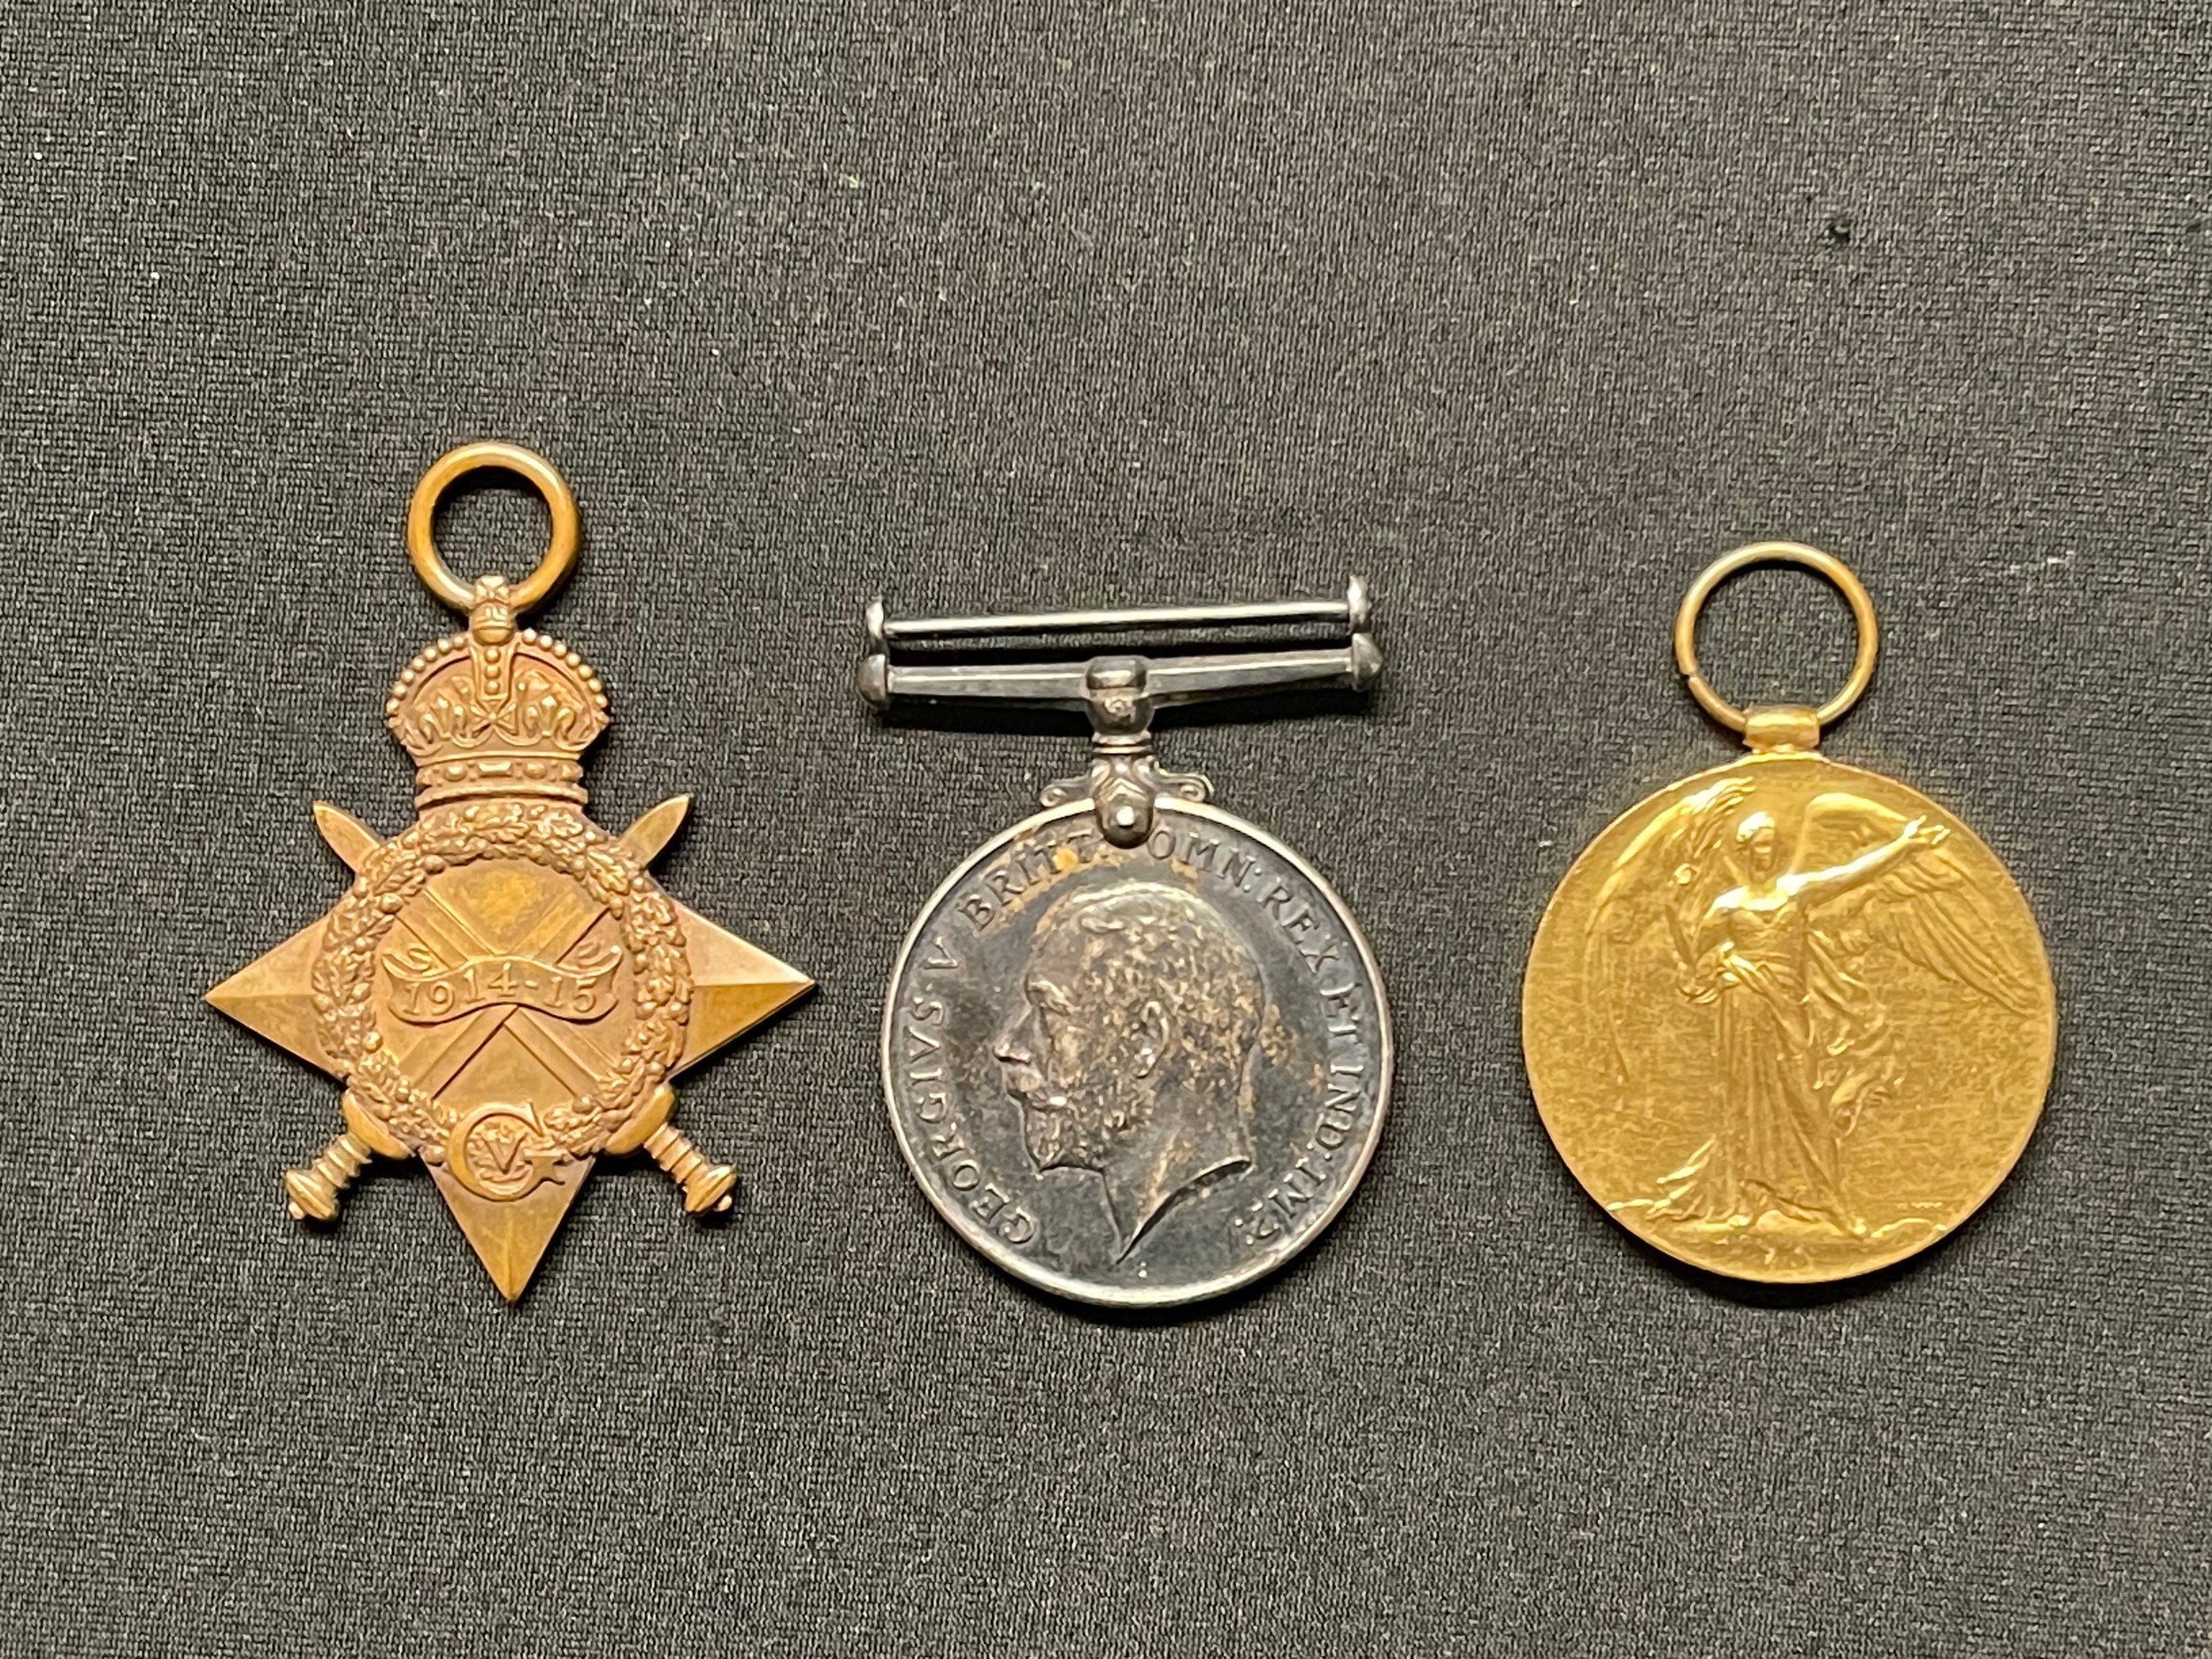 WW1 British Royal Navy medal group comprising of 1914-15 Star, War Medal and Victory Medal to K24784